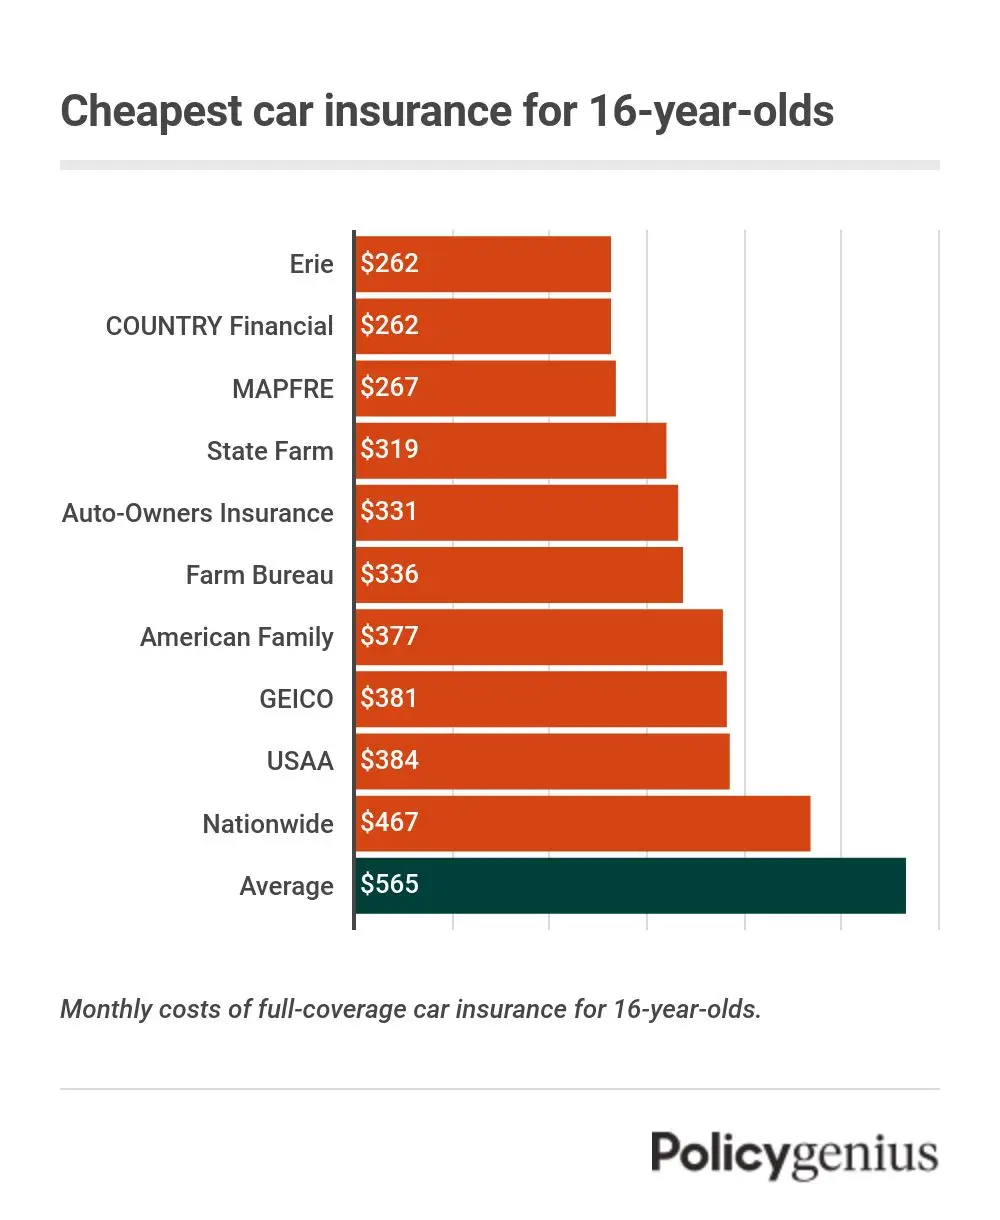 A bar graph showing the cheapest car insurance for 16-year-olds, with Erie and COUNTRY as the most affordable option.